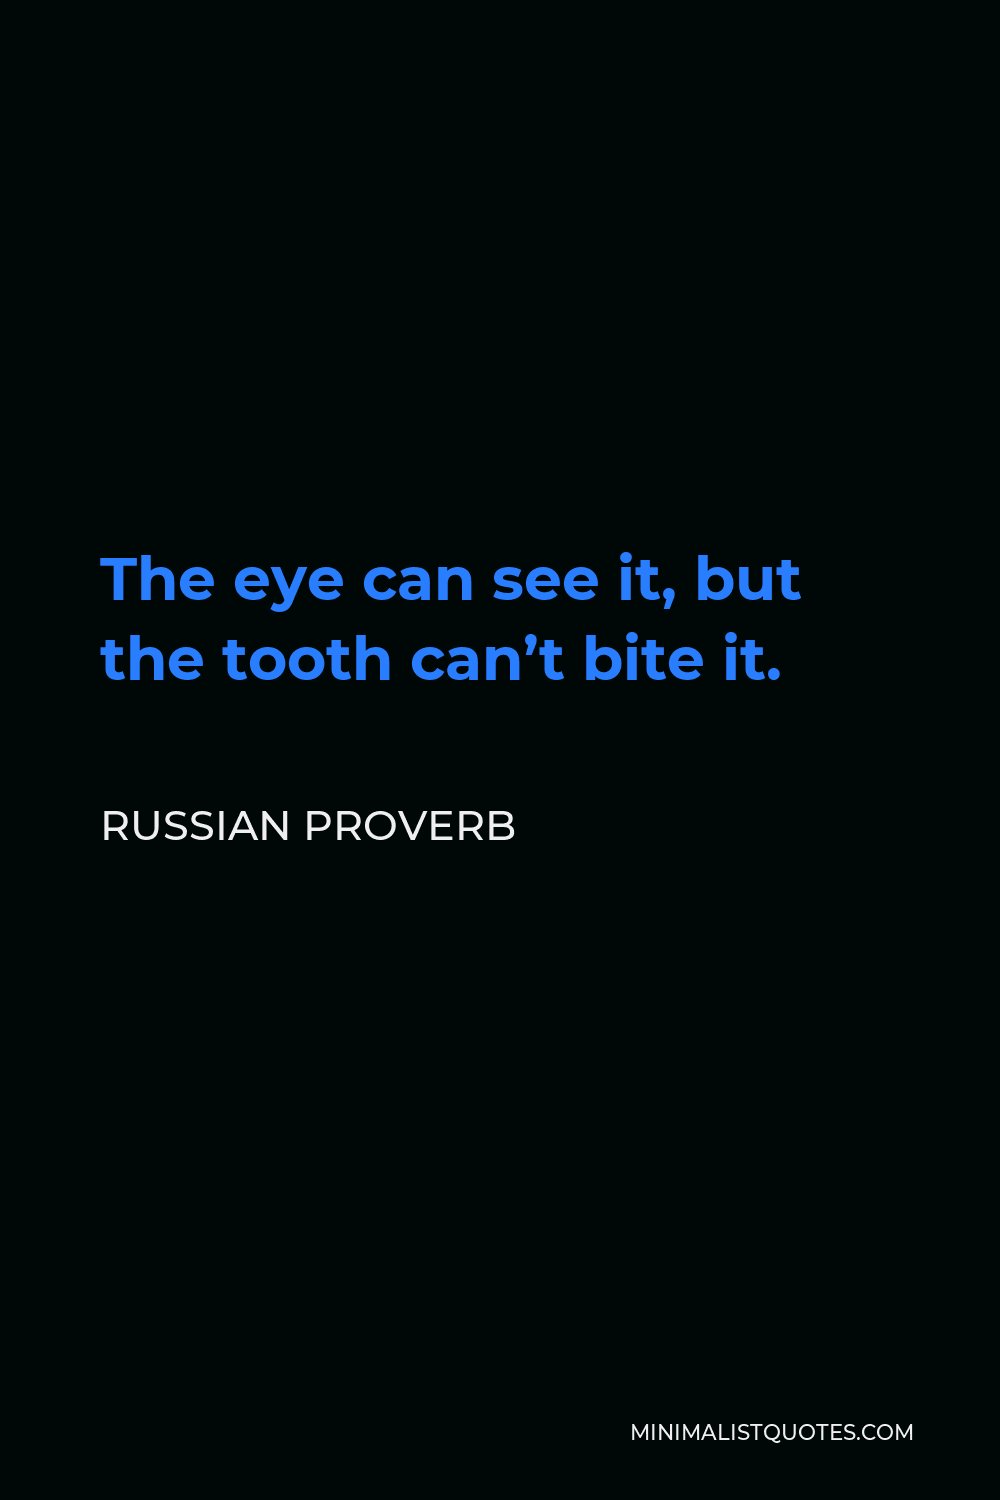 Russian Proverb Quote - The eye can see it, but the tooth can’t bite it.